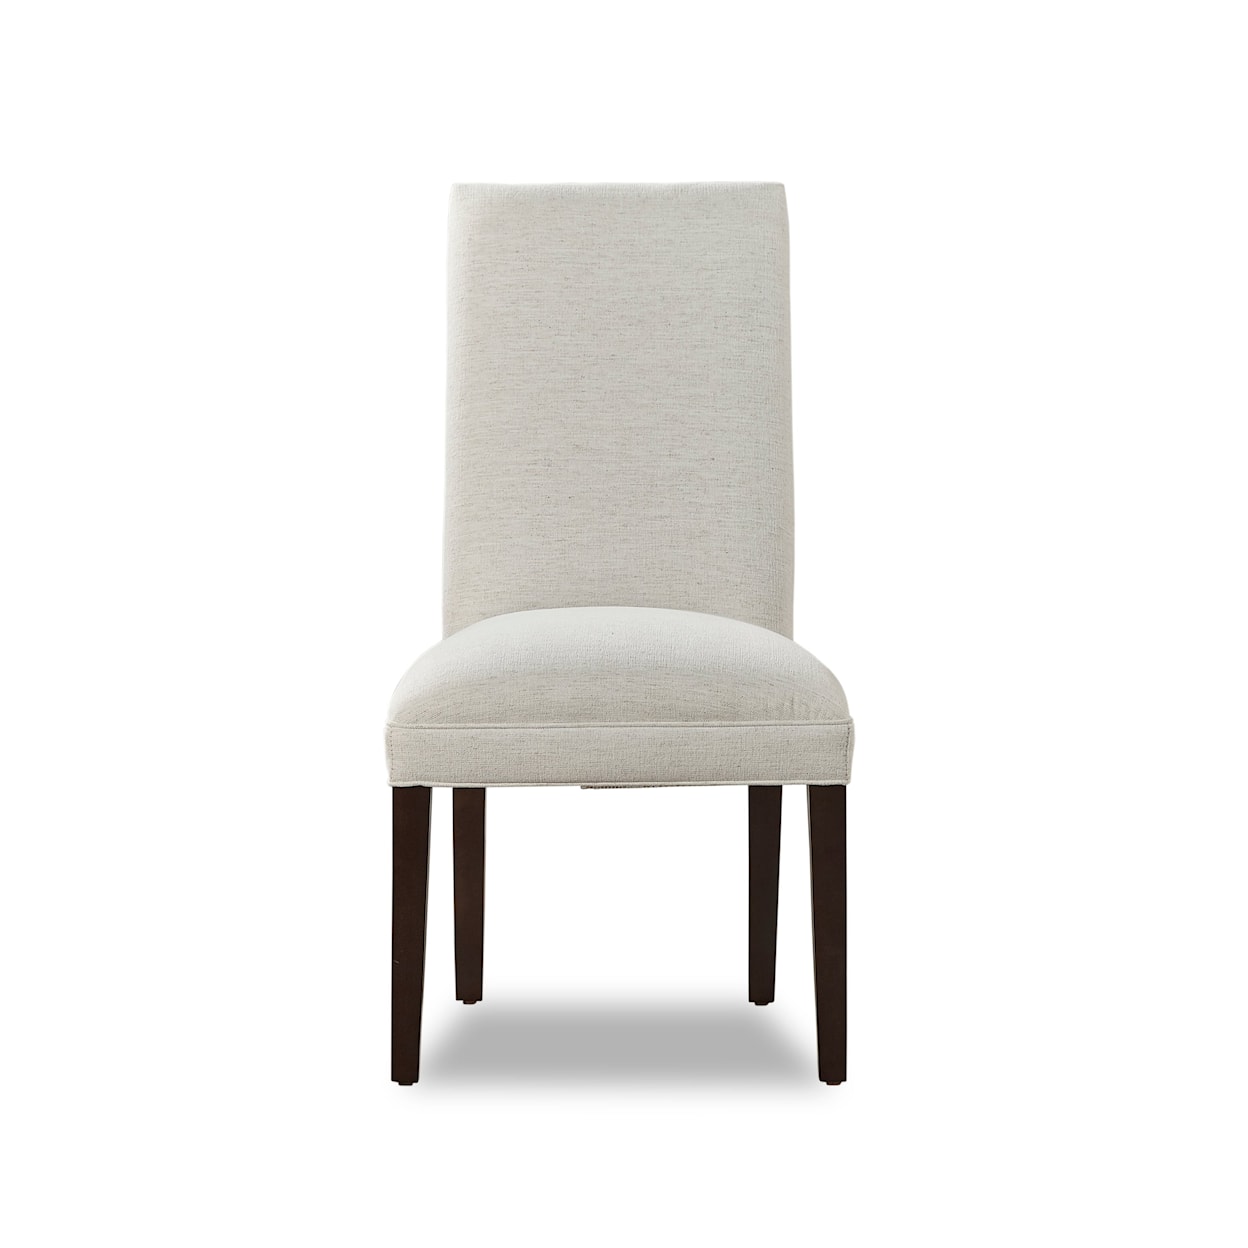 Huntington House 2421 Series Upholstered Dining Chair